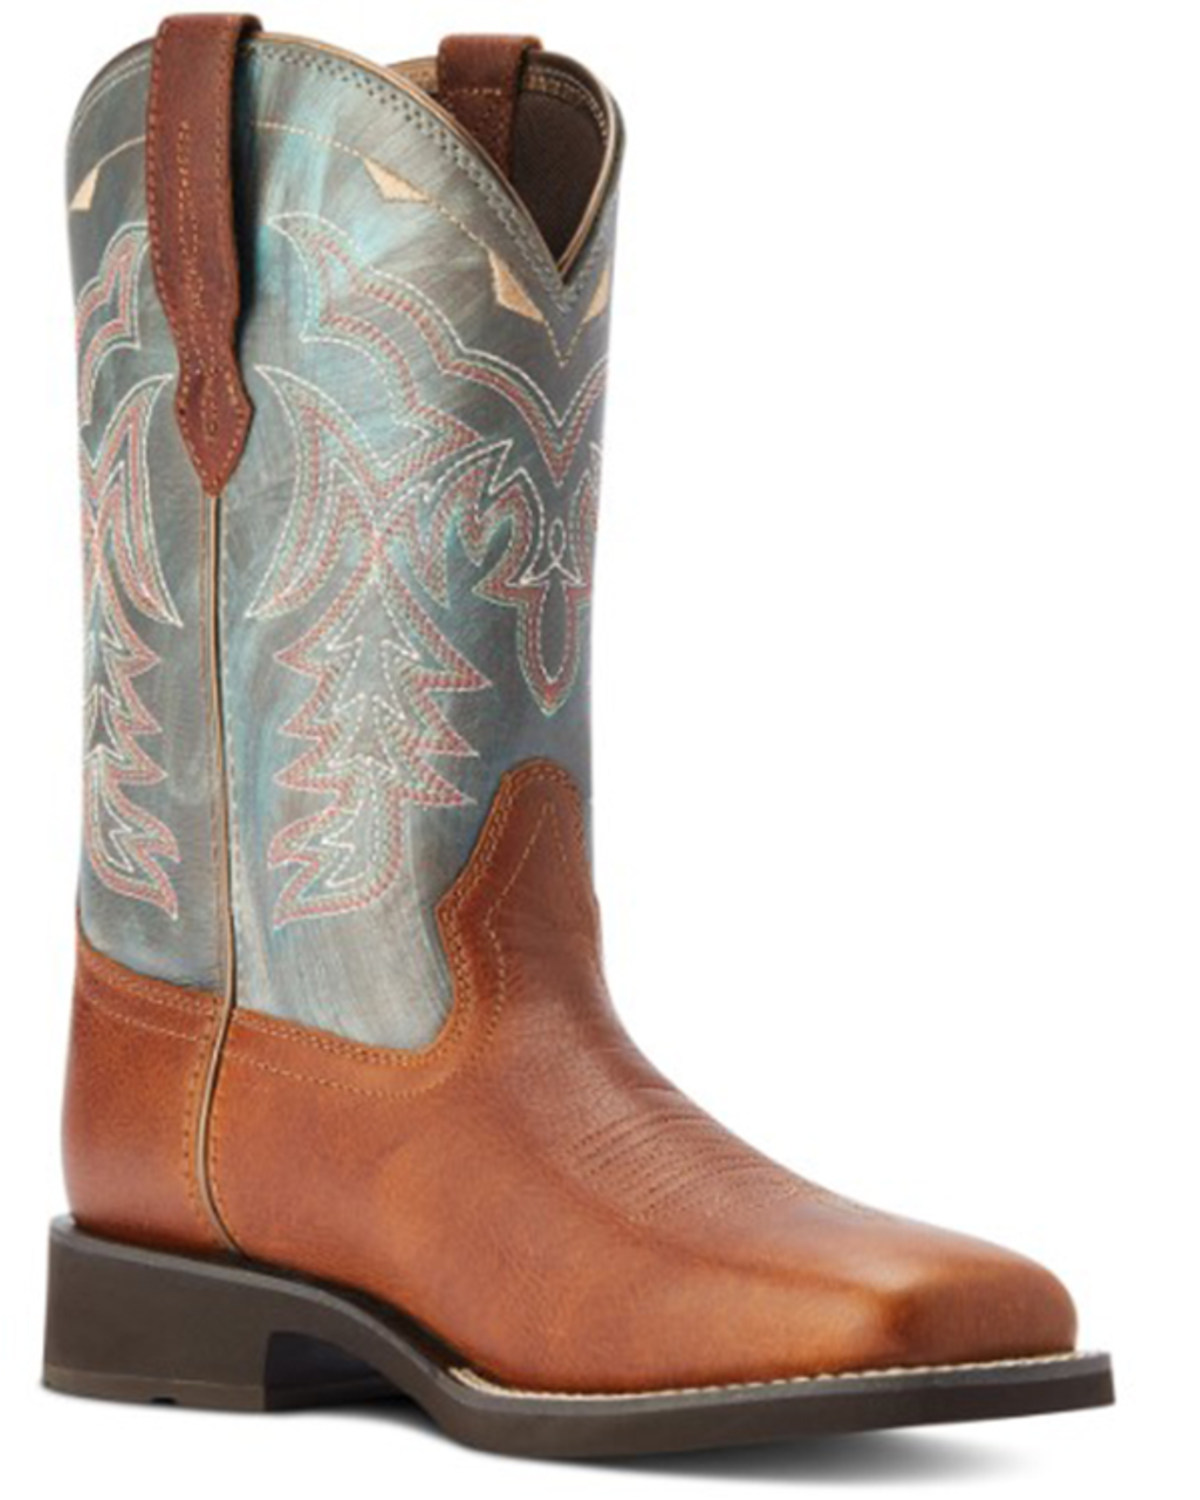 Ariat Women's Delilah Western Boots - Broad Square Toe